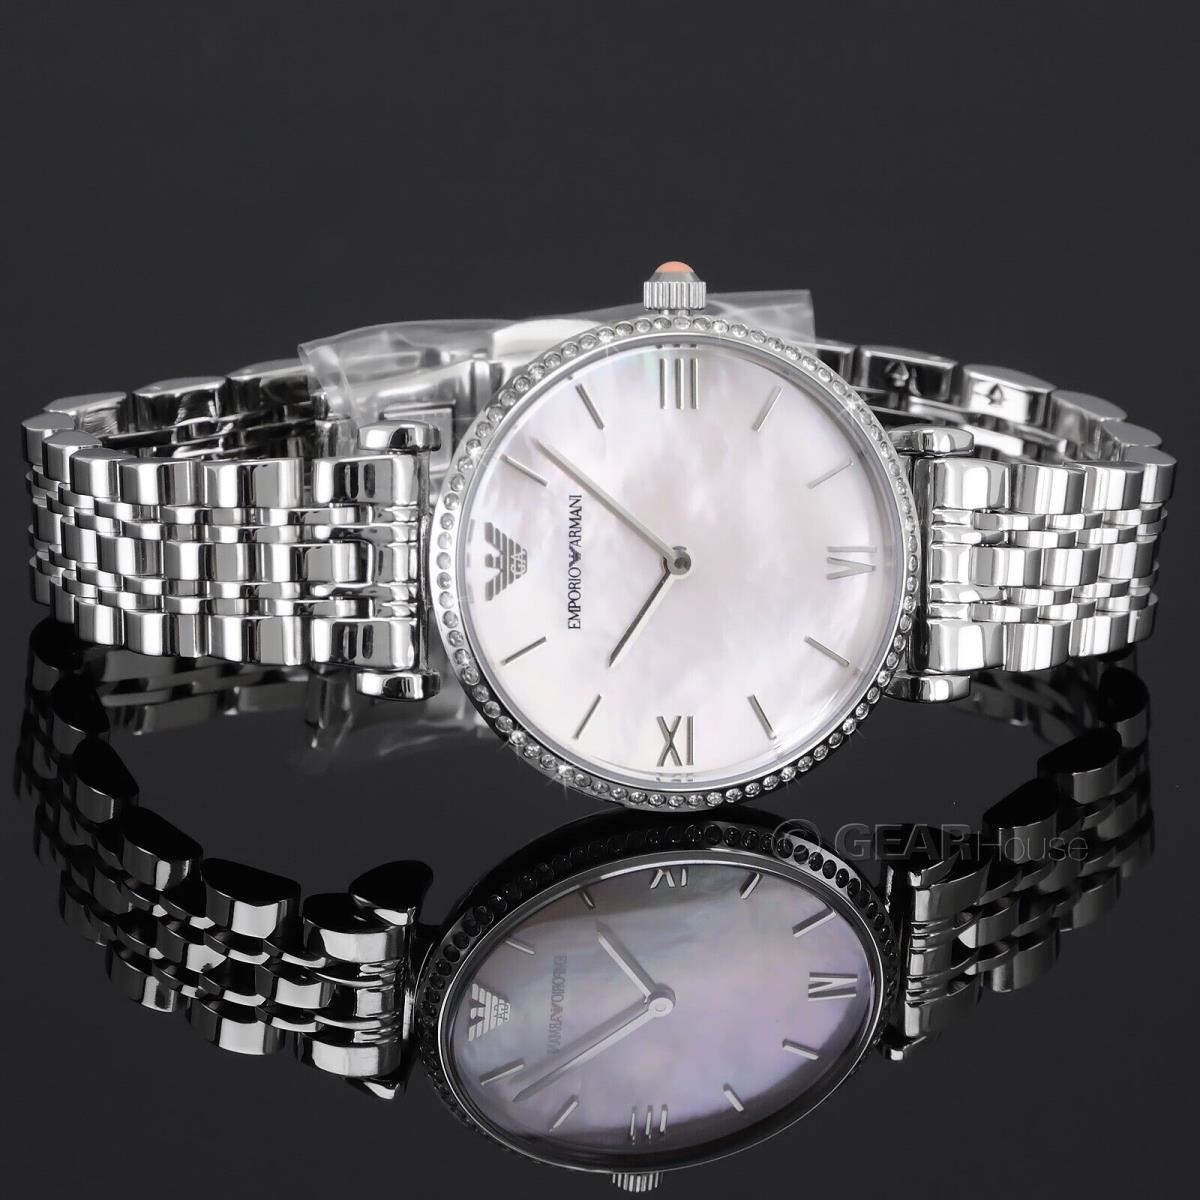 Emporio Armani watch  - Pink Dial, Silver Band, Silver Bezel